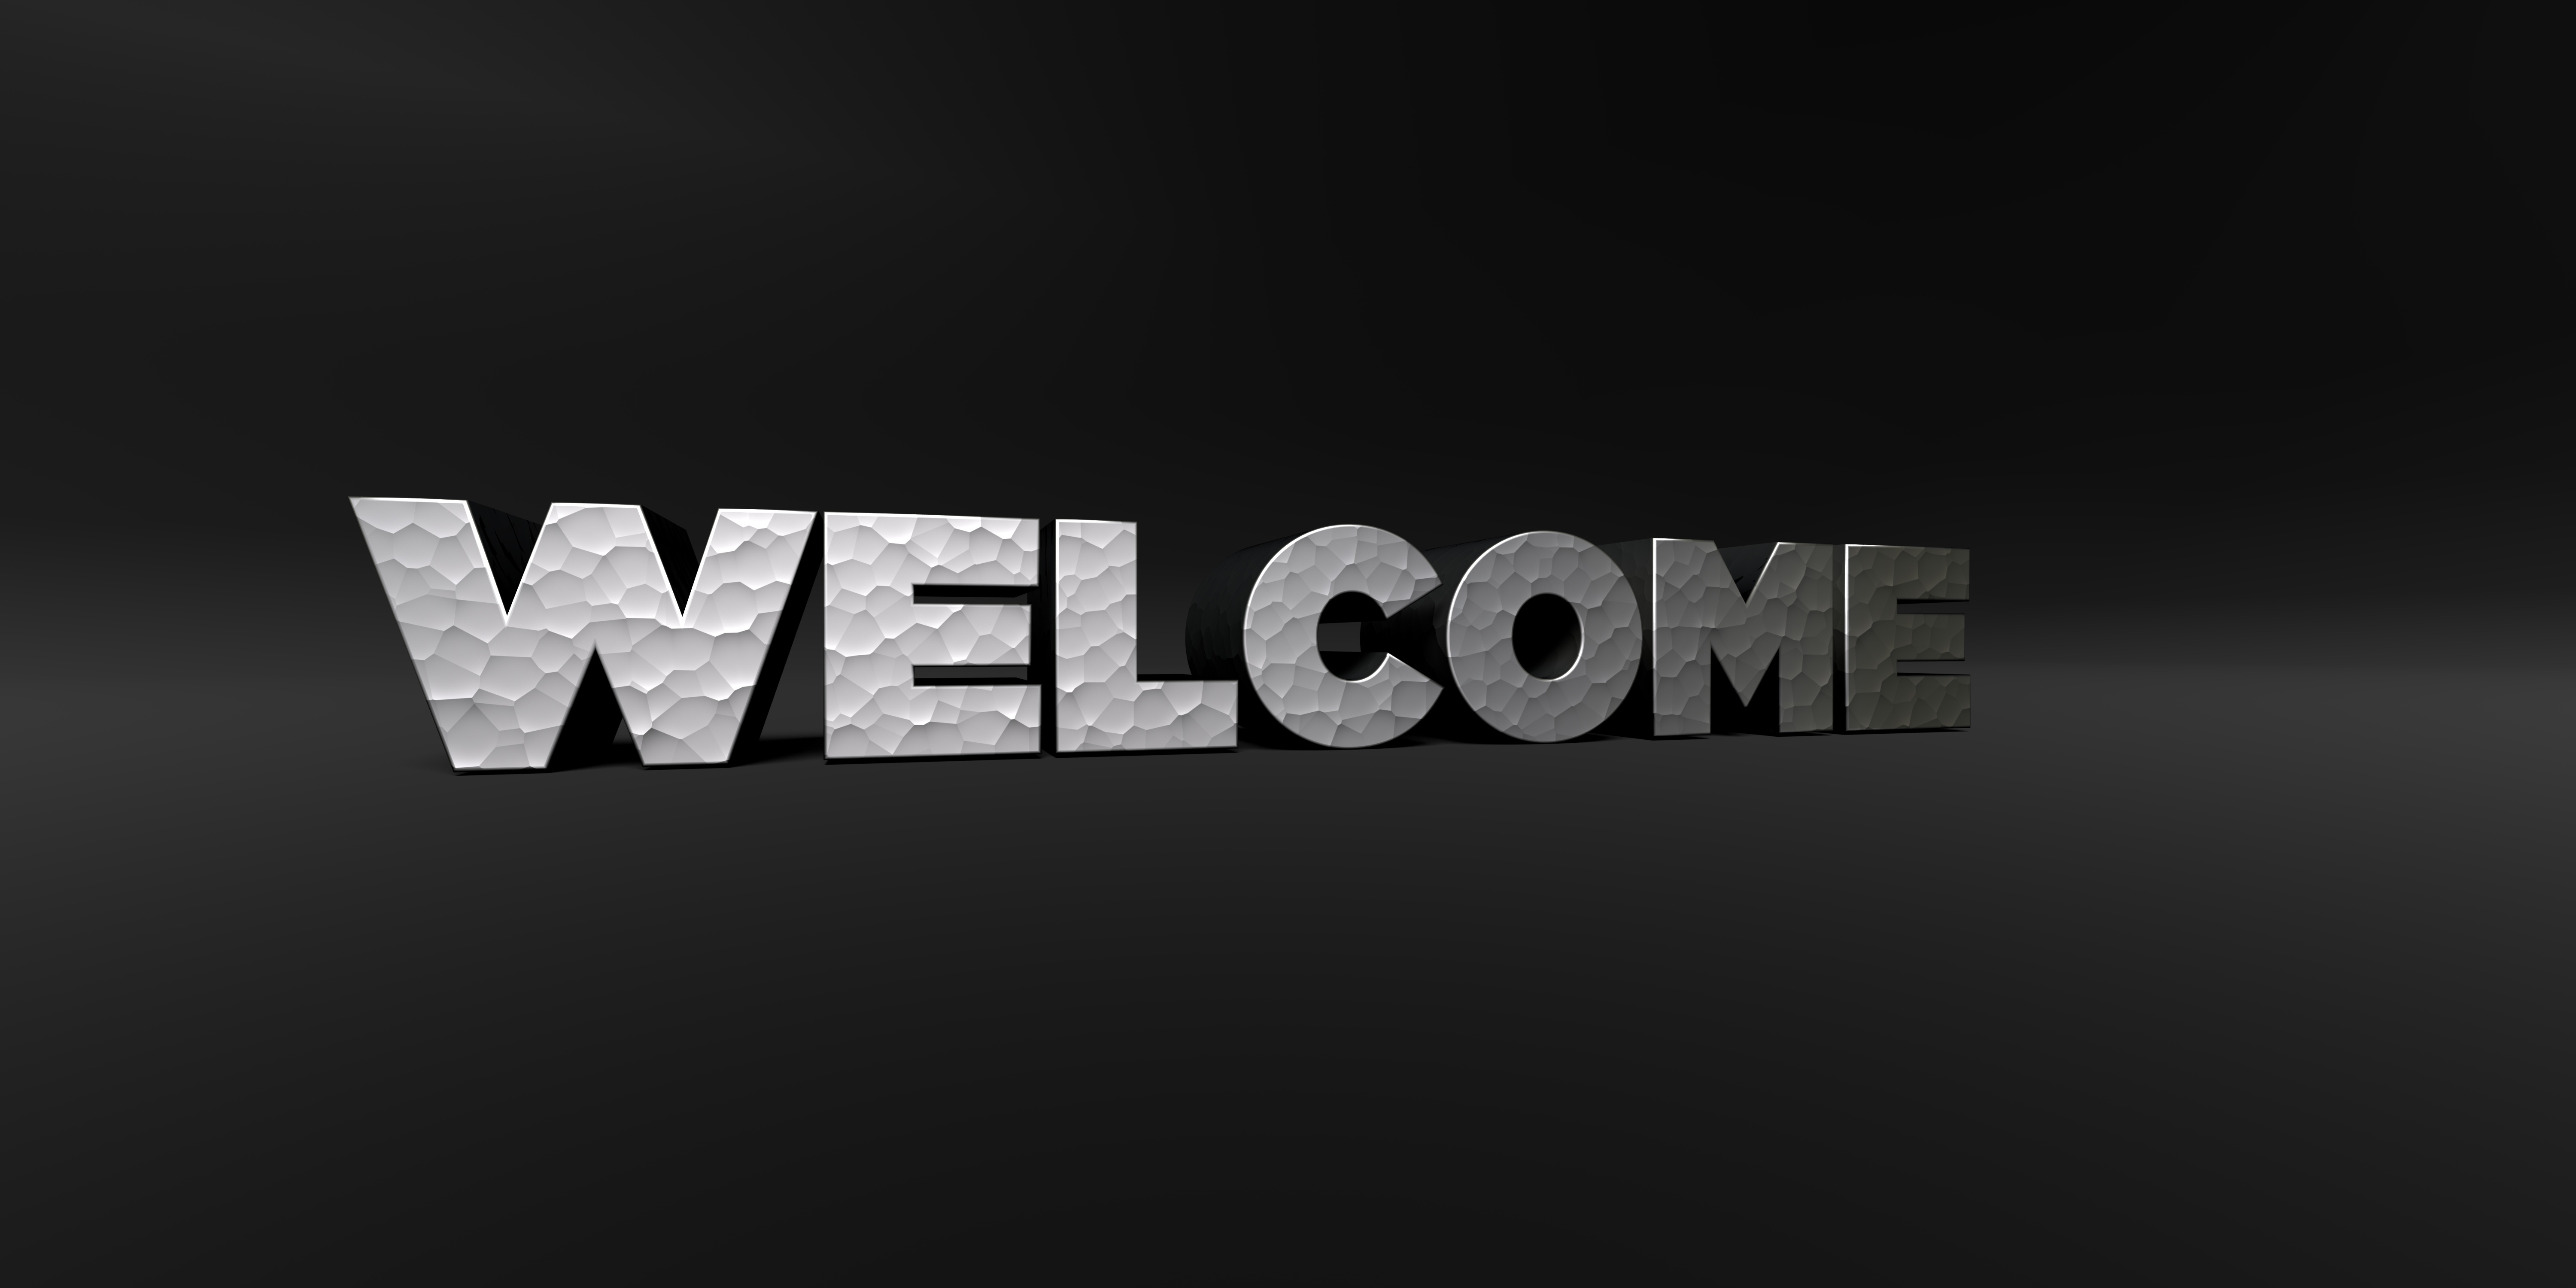 WELCOME - metal finish text on black studio - 3D rendered stock photo